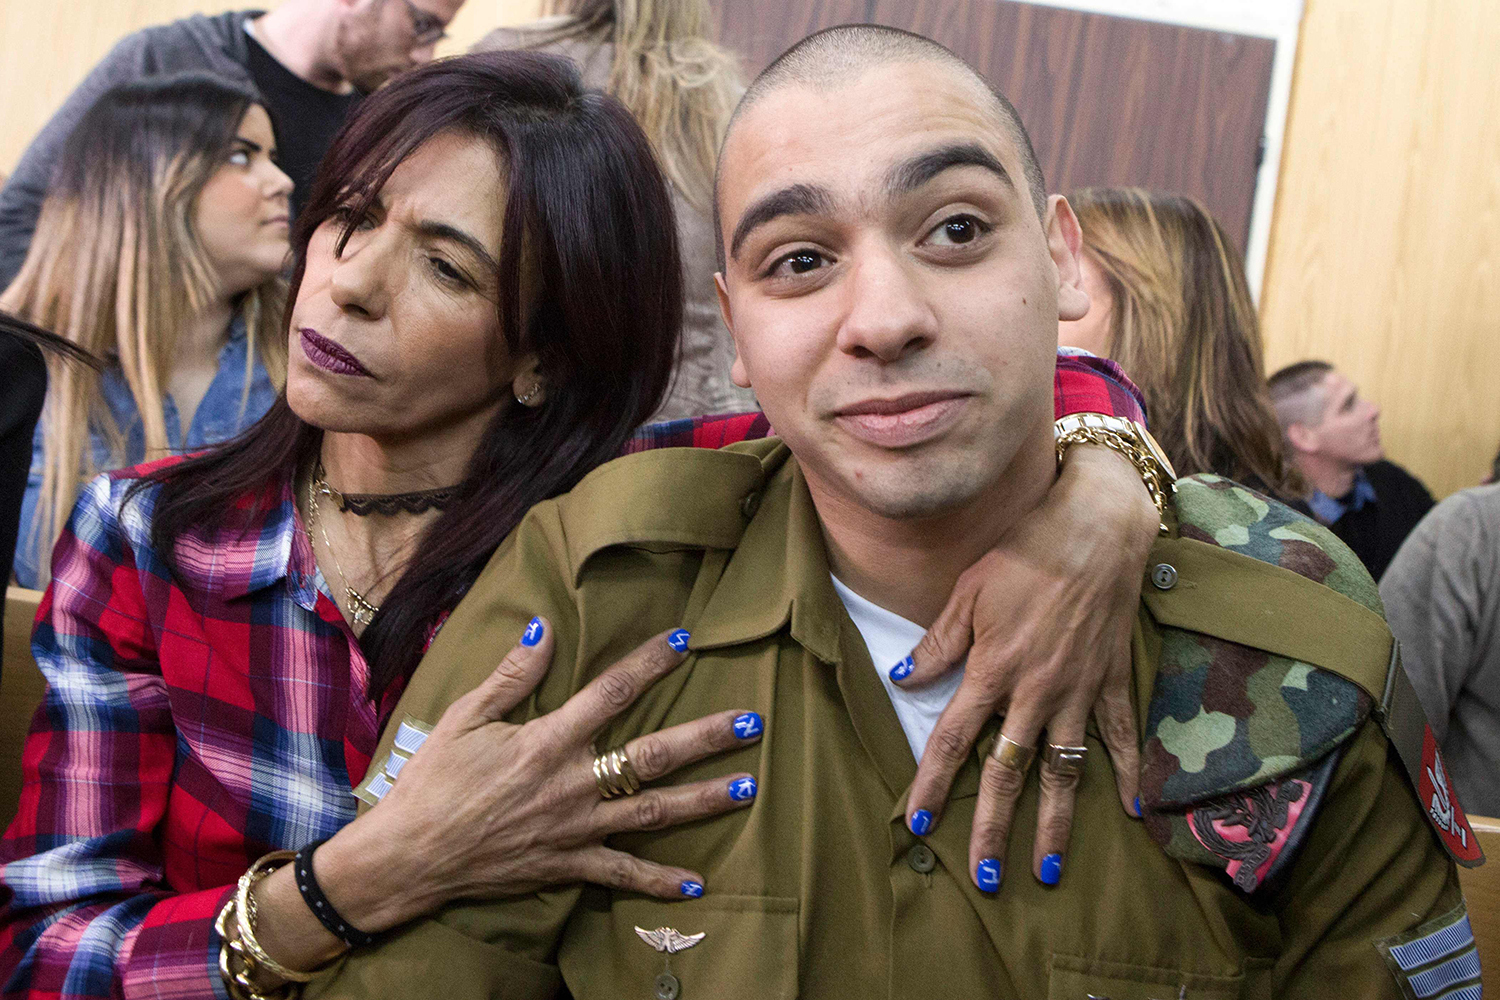 TOPSHOT - Israeli soldier Elor Azaria (R), who shot dead a wounded Palestinian assailant in March 2016, is embraced by his mother Oshra (L) at the start of his sentencing hearing in a military court in Tel Aviv on February 21, 2017. An Israeli military court will sentence a soldier convicted of the manslaughter of a Palestinian attacker in a case which has stoked passions, debate and protest. / AFP PHOTO / POOL / JIM HOLLANDER / TT / kod 444